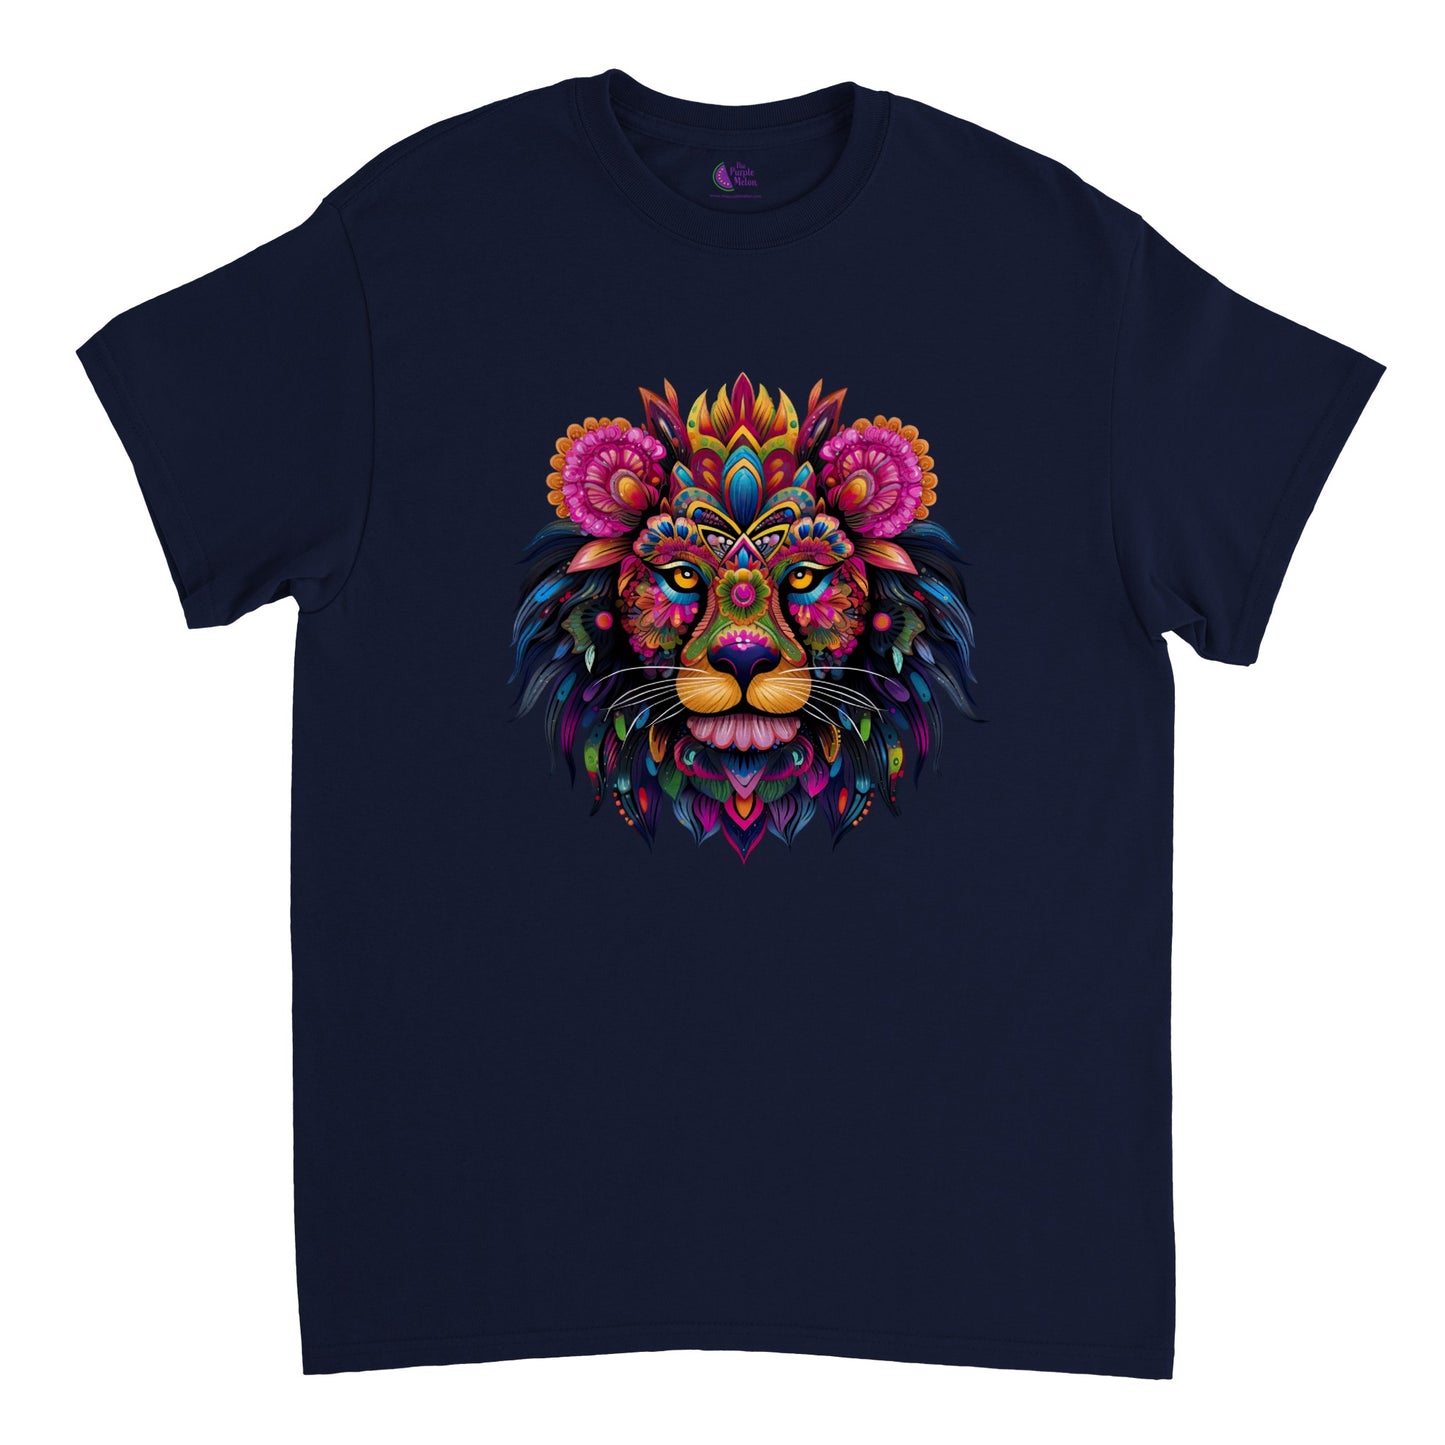 navy blue t-shirt with a colorful floral lion print